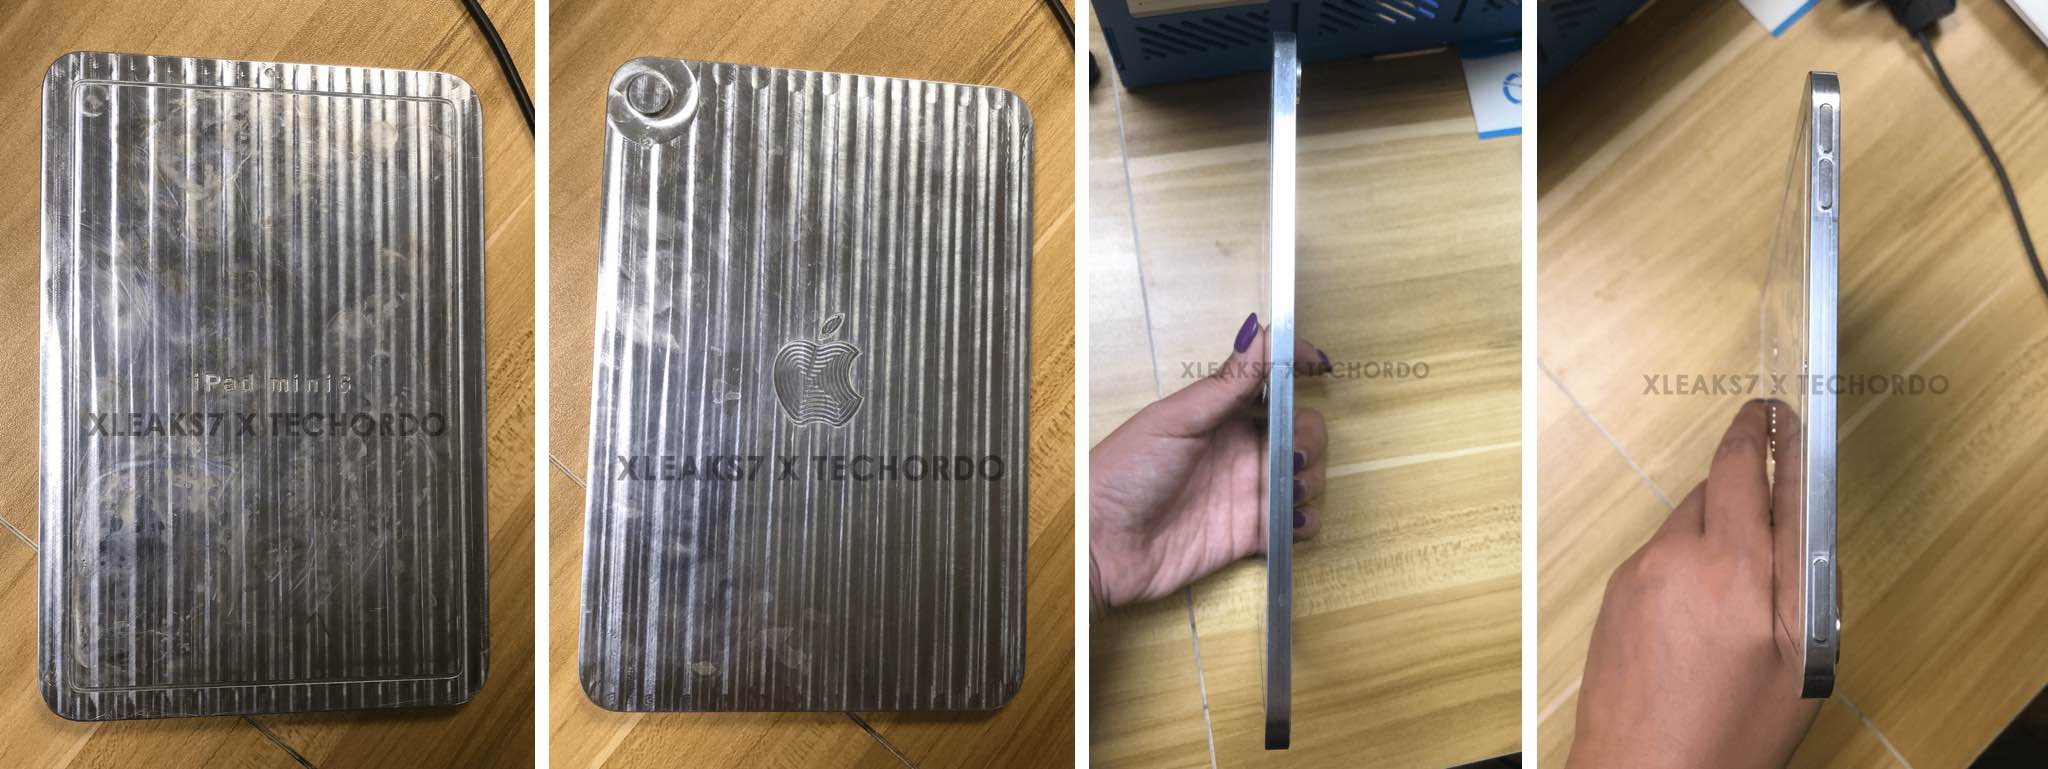 A series of images showing a claimed manufacturing mold for the sixth-generation iPad mini